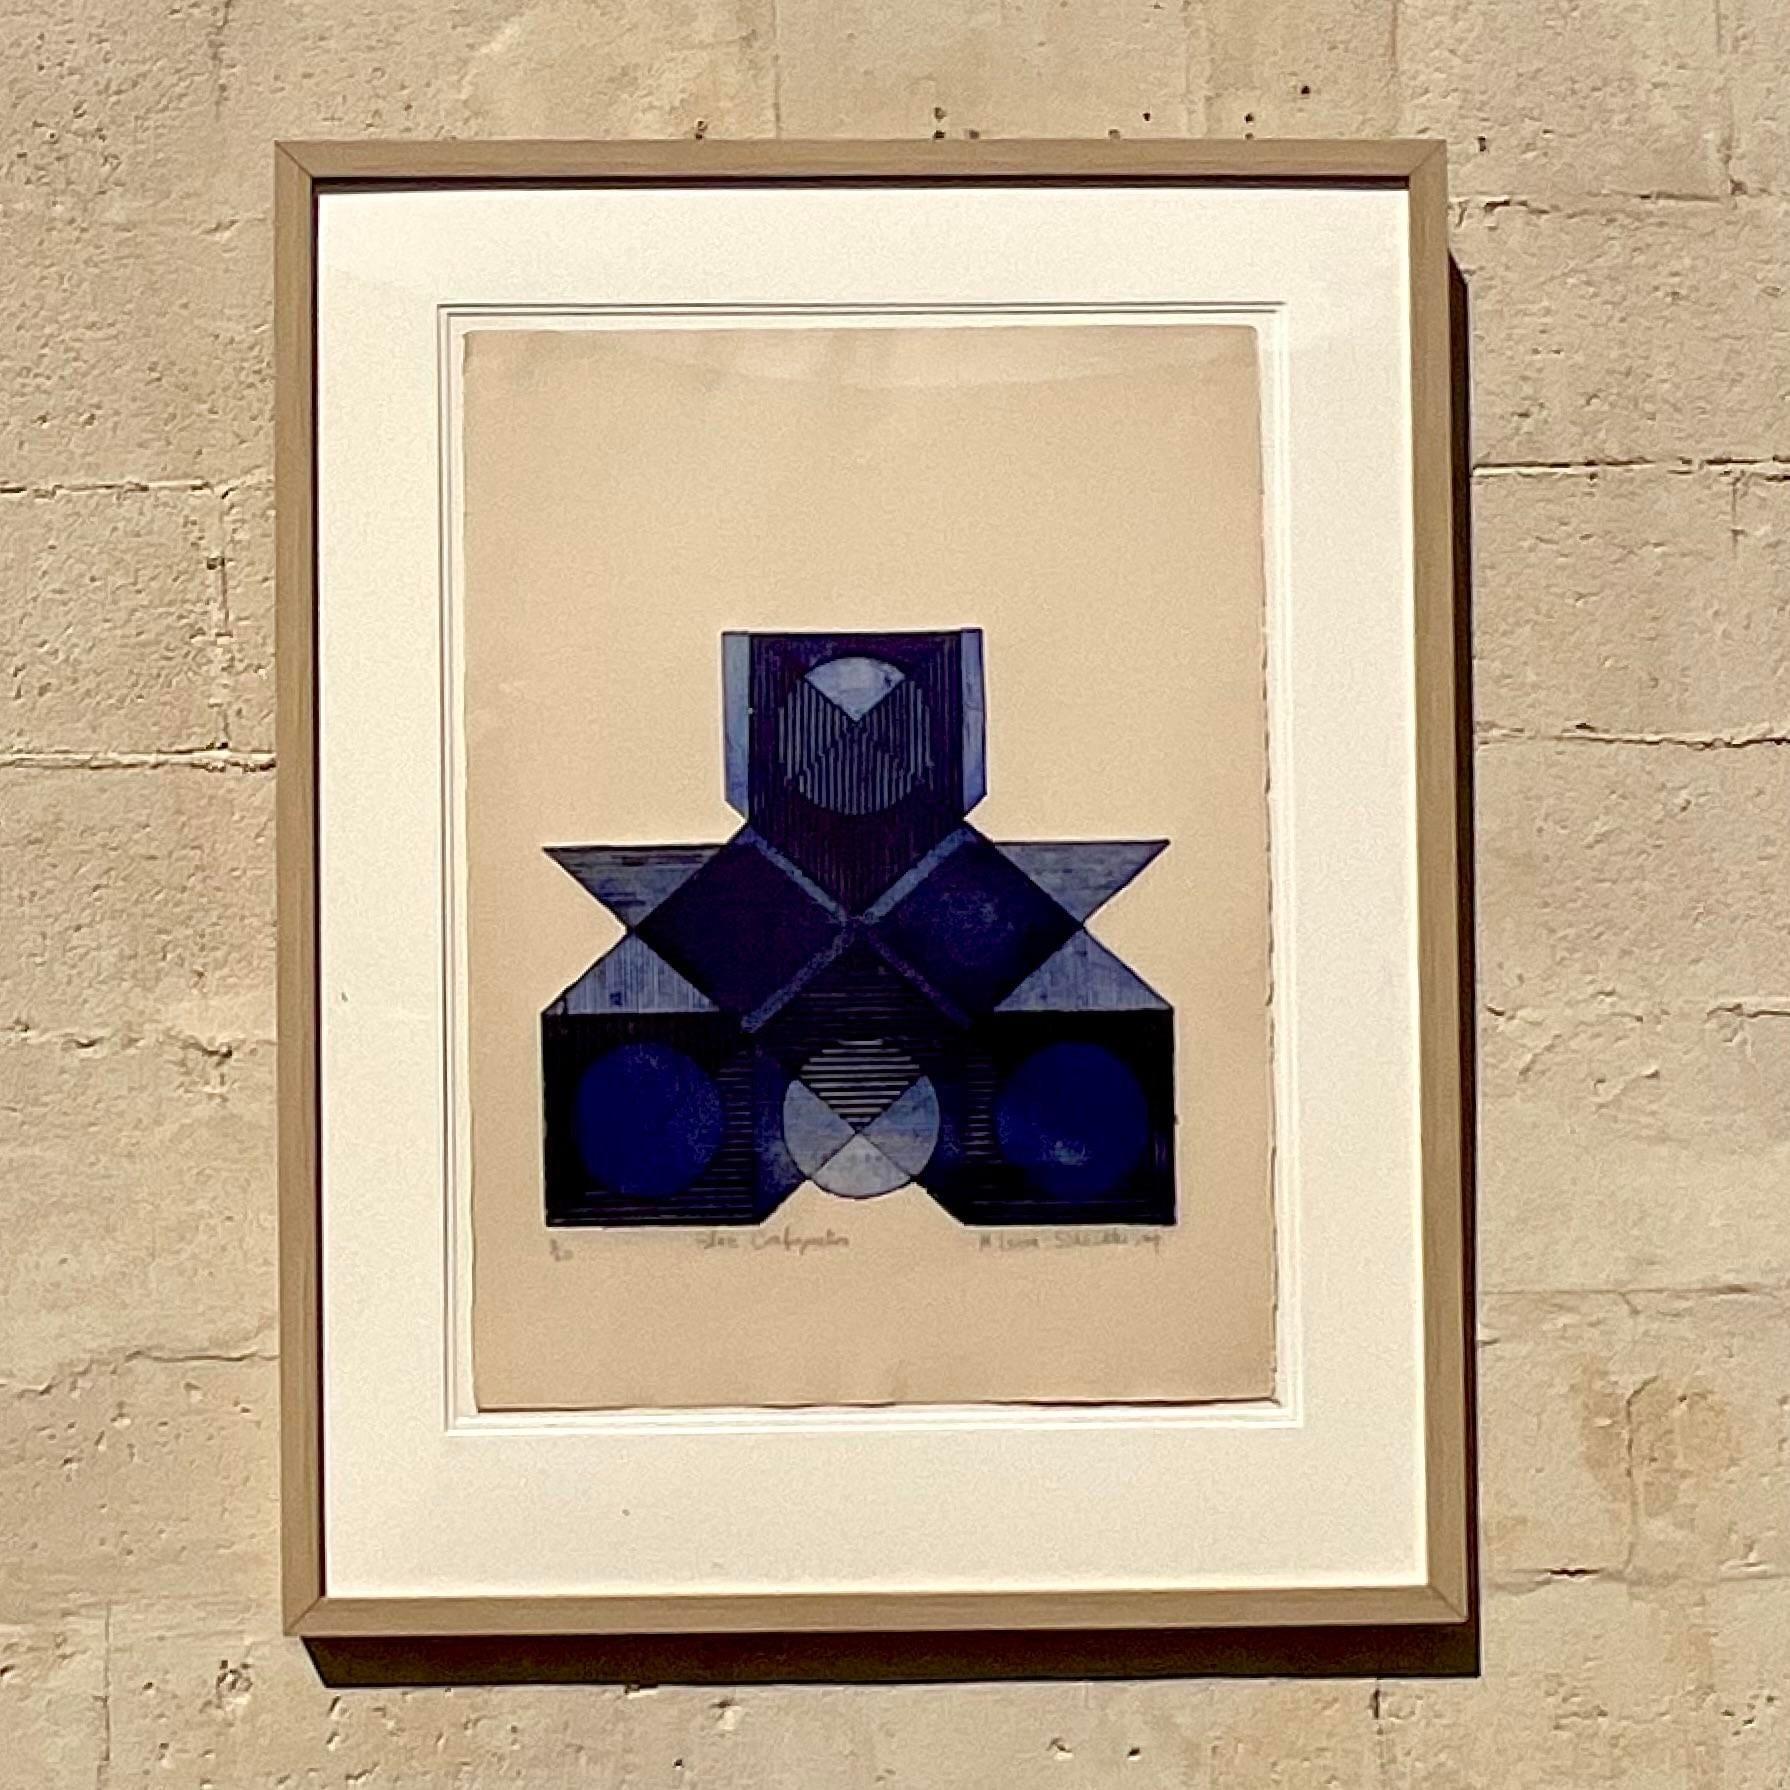 A fantastic vintage Boho Serigraph. A range of deep blues in the geometric Abstract composition. Signed and numbered by the artist. Acquired from a Palm Beach estate